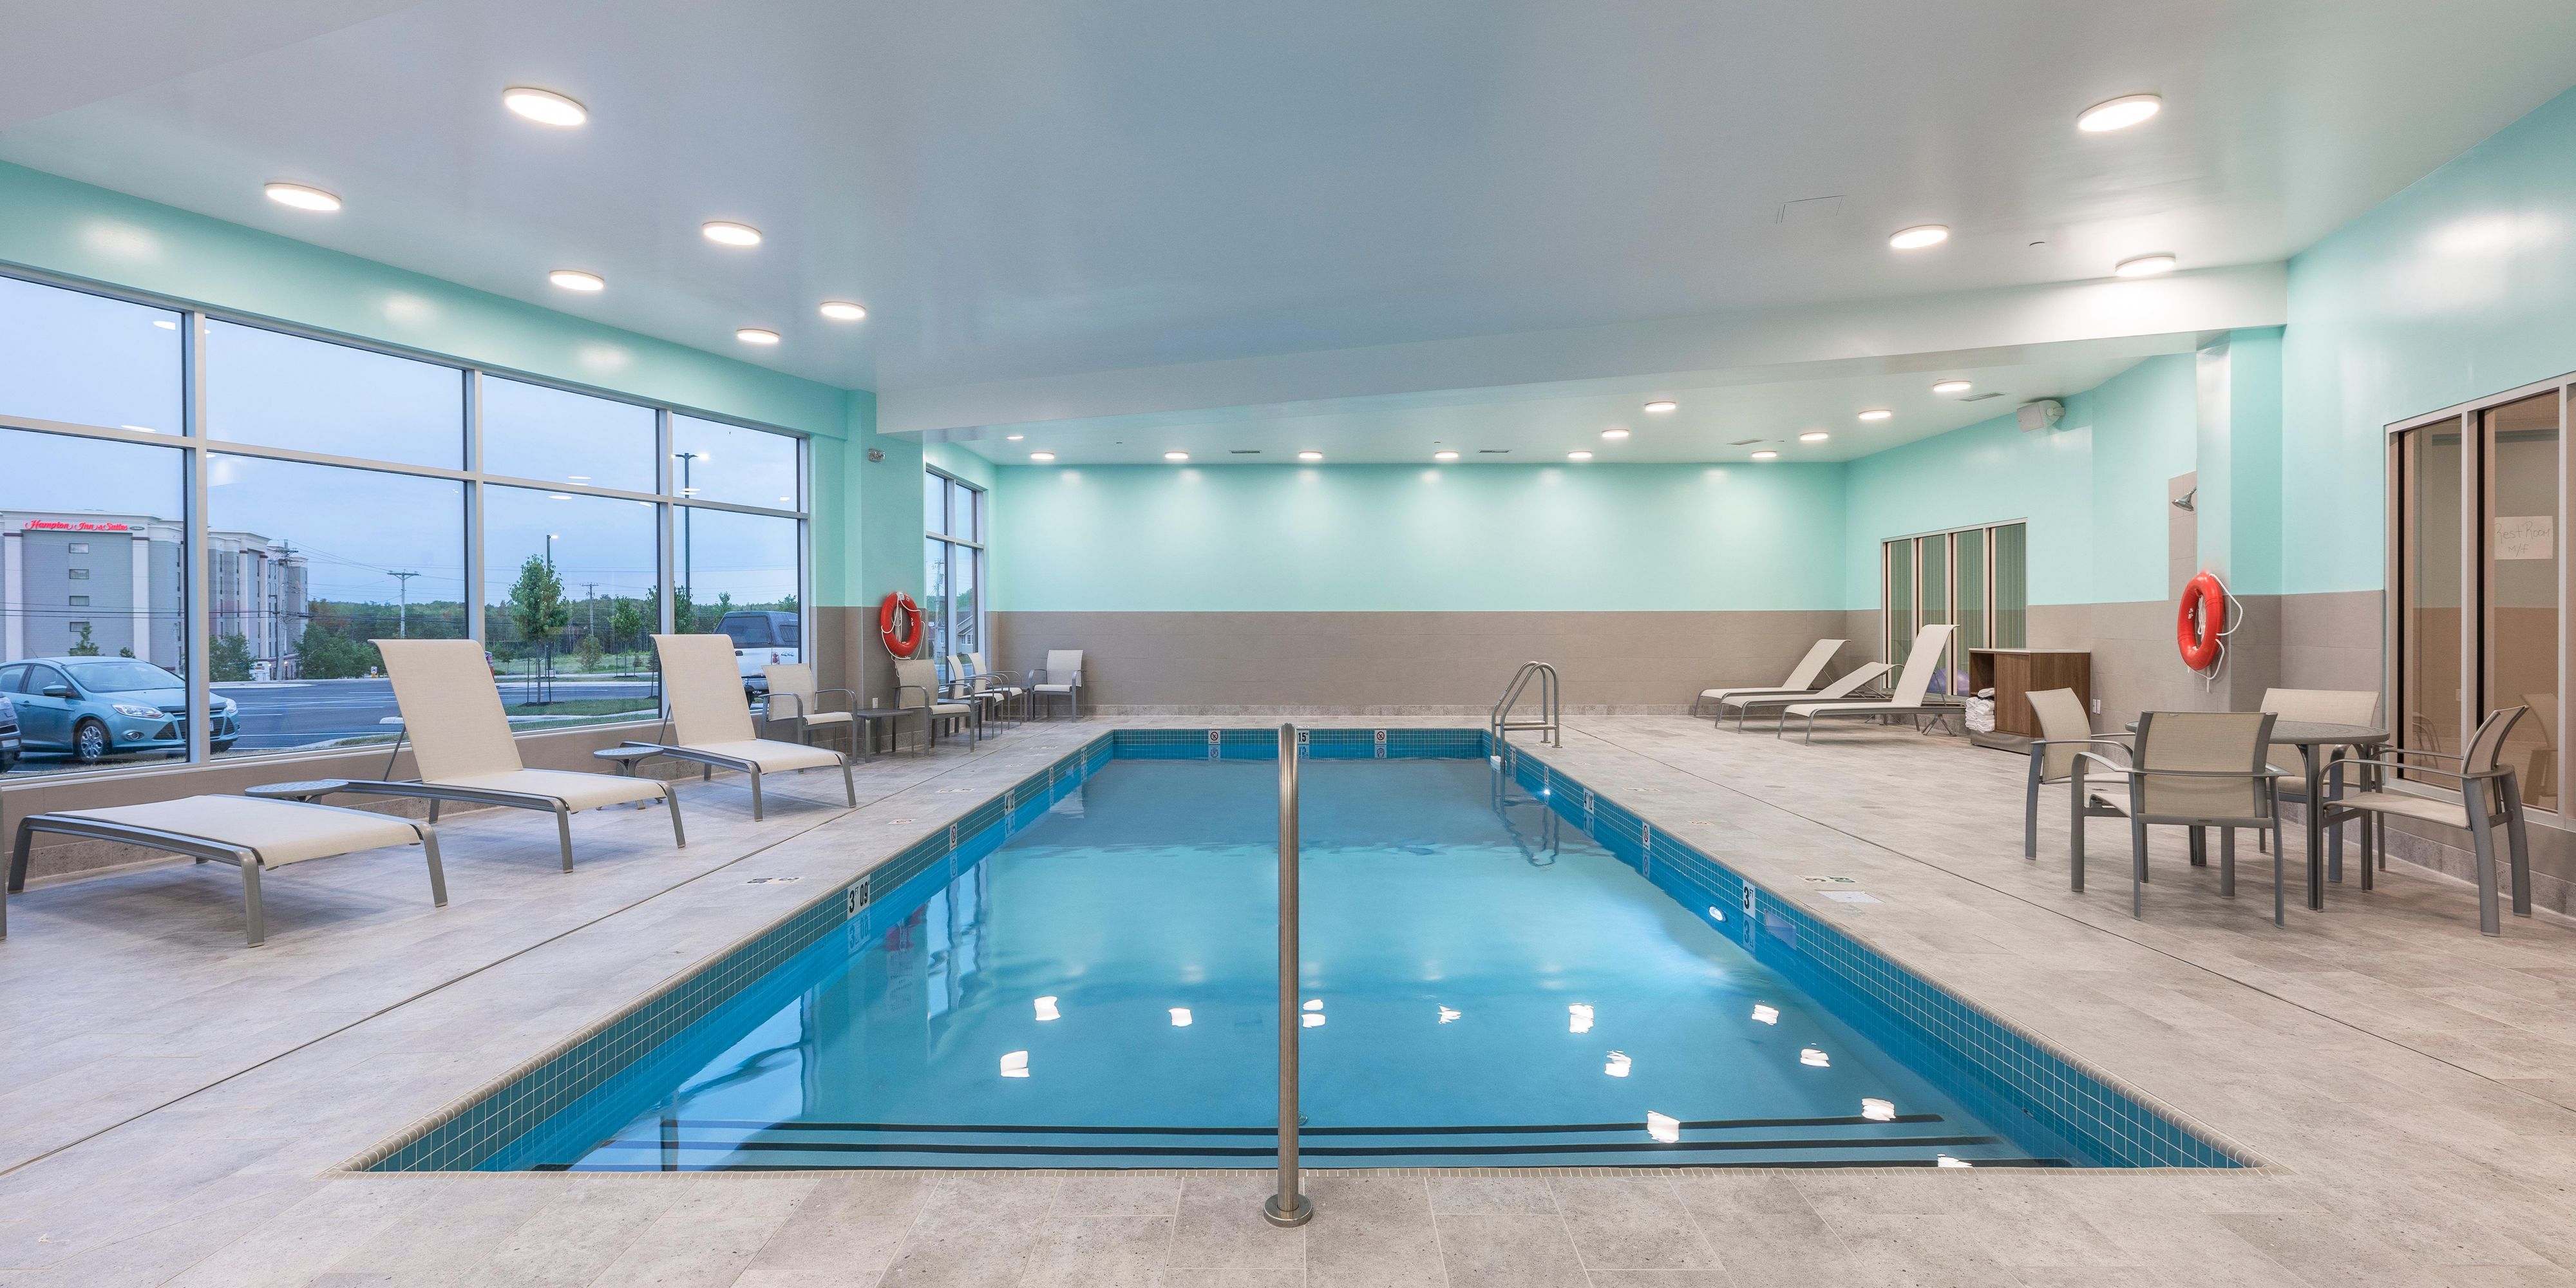 We've got fun for the whole family and the perfect way to unwind after exploring Moncton- take a dip in our heated indoor swimming pool. What better way to tire the kids out before you have a great nights' sleep in your guest room. (Subject to COVID-19 restrictions)